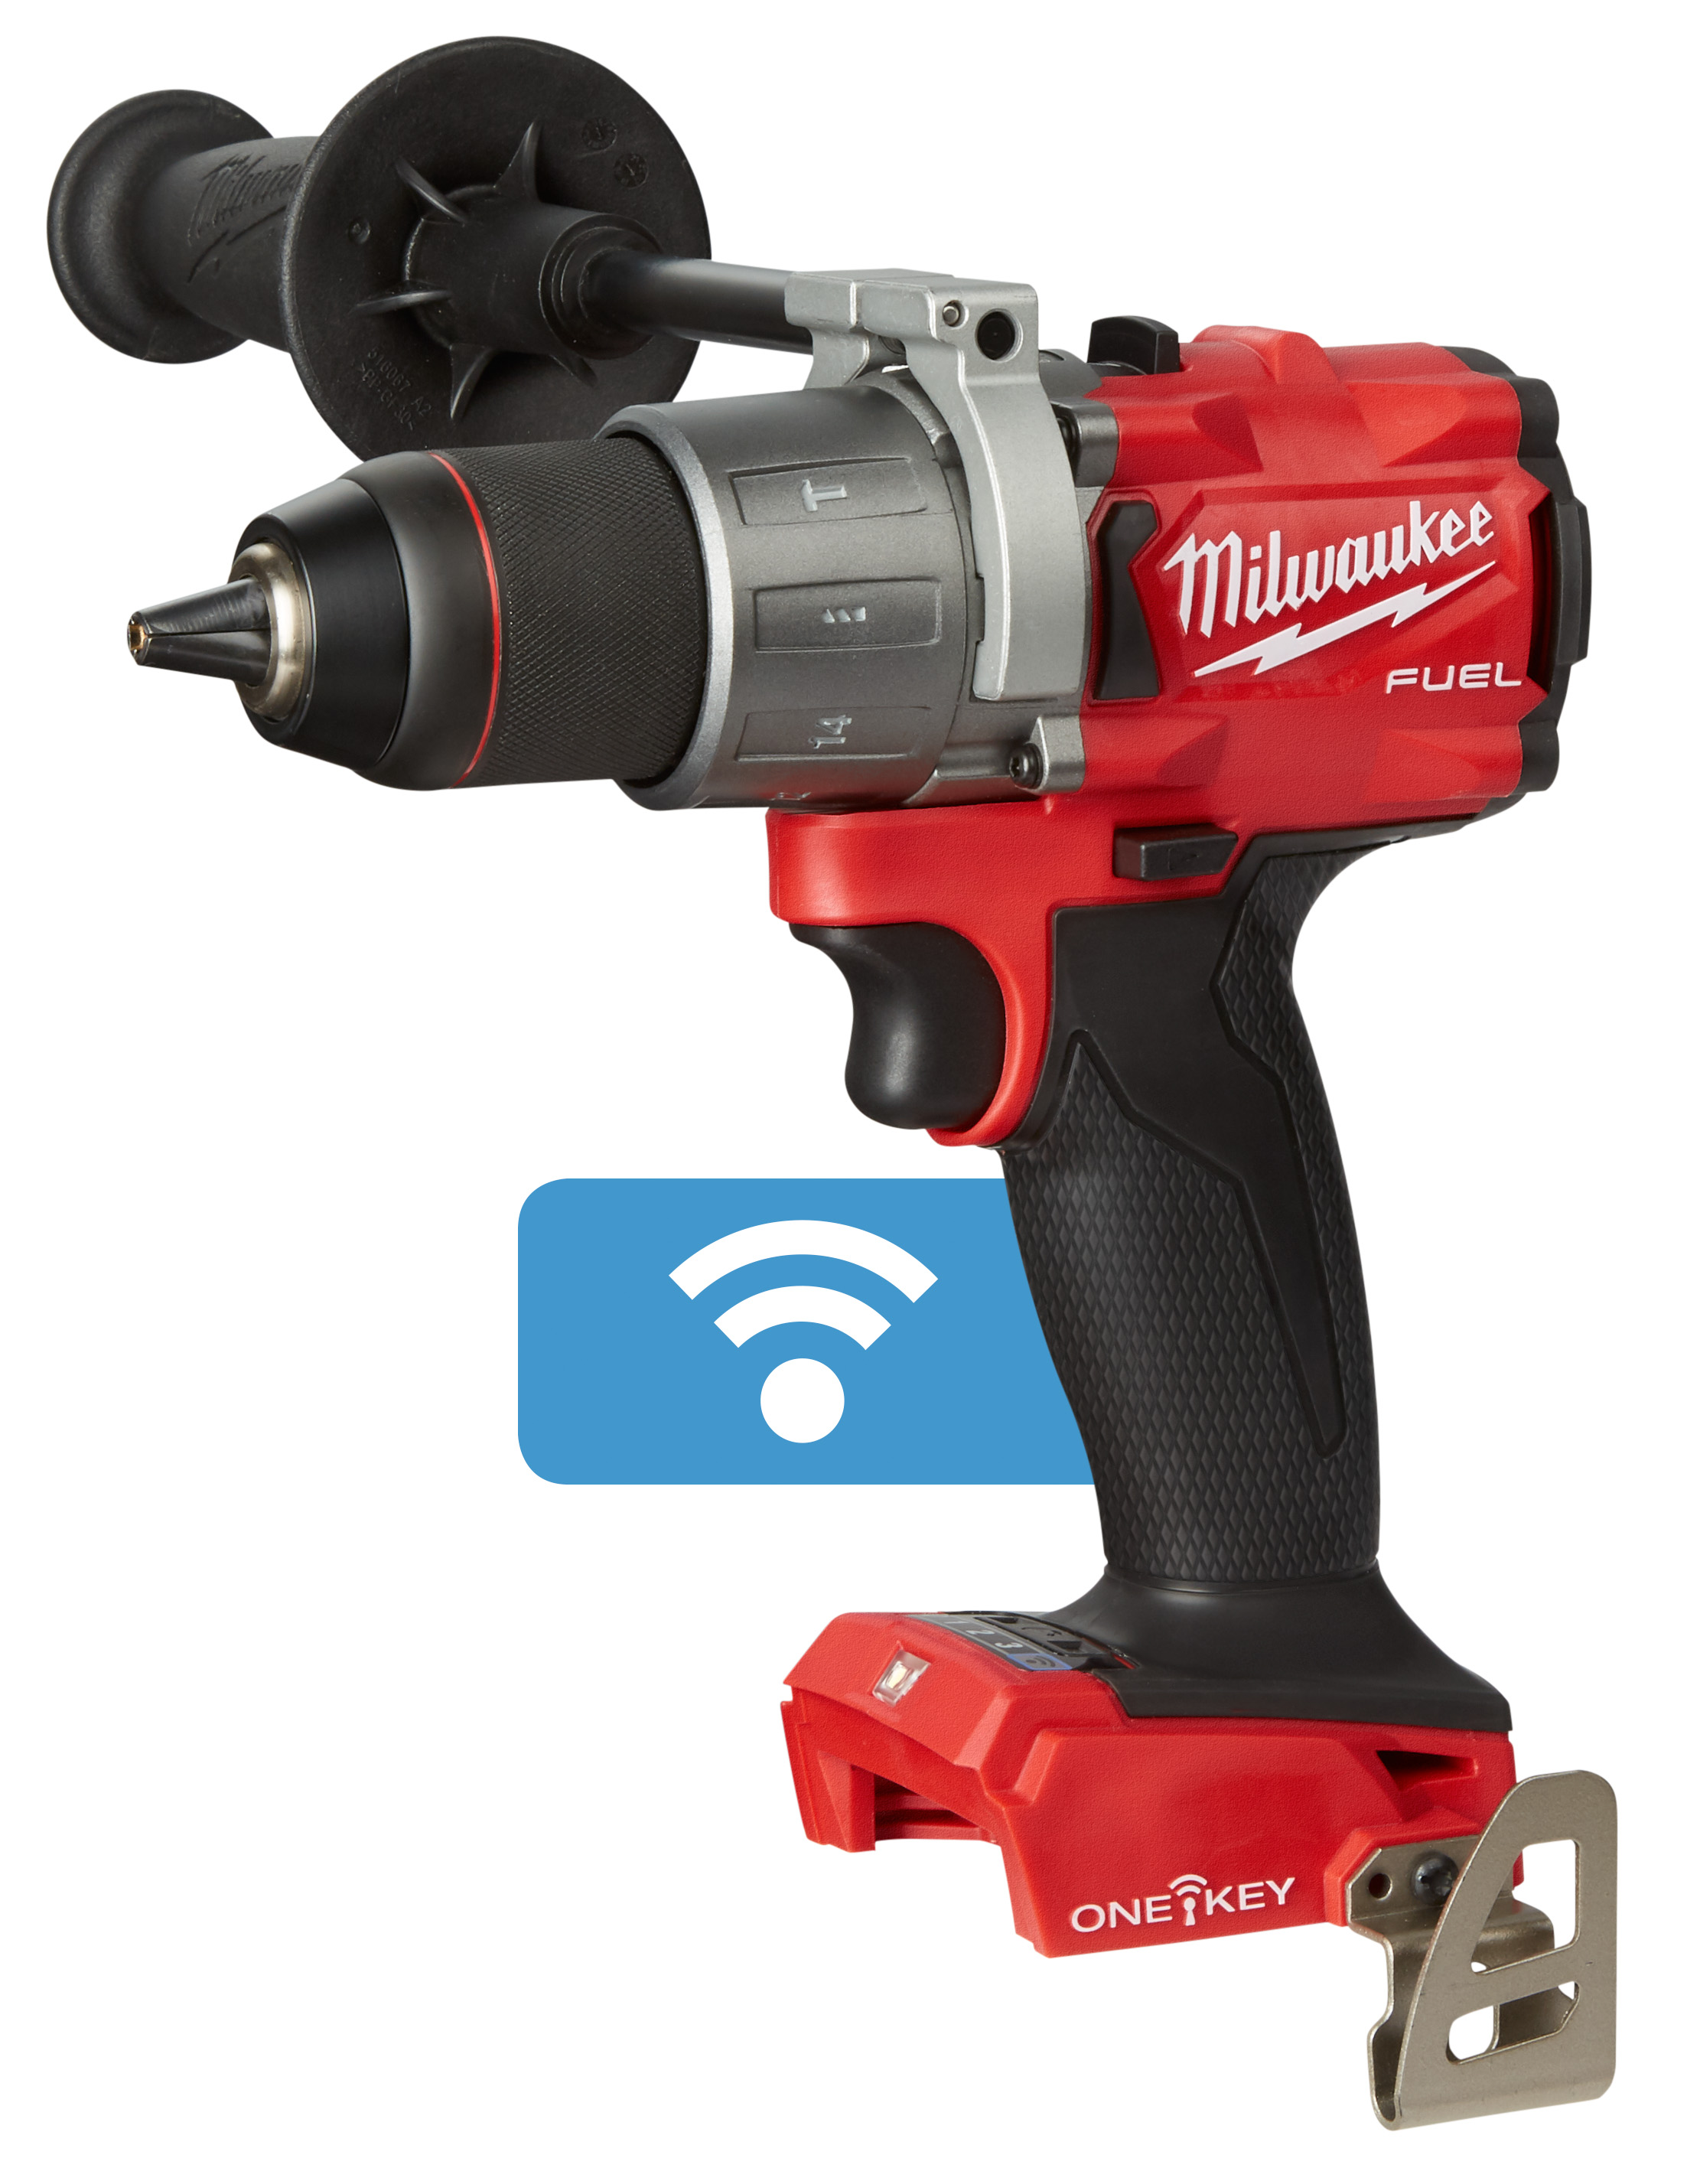 M18 FUEL ONE-KEY 18 Volt Lithium-Ion Cordless 1/2 in. Hammer Drill - Tool Only